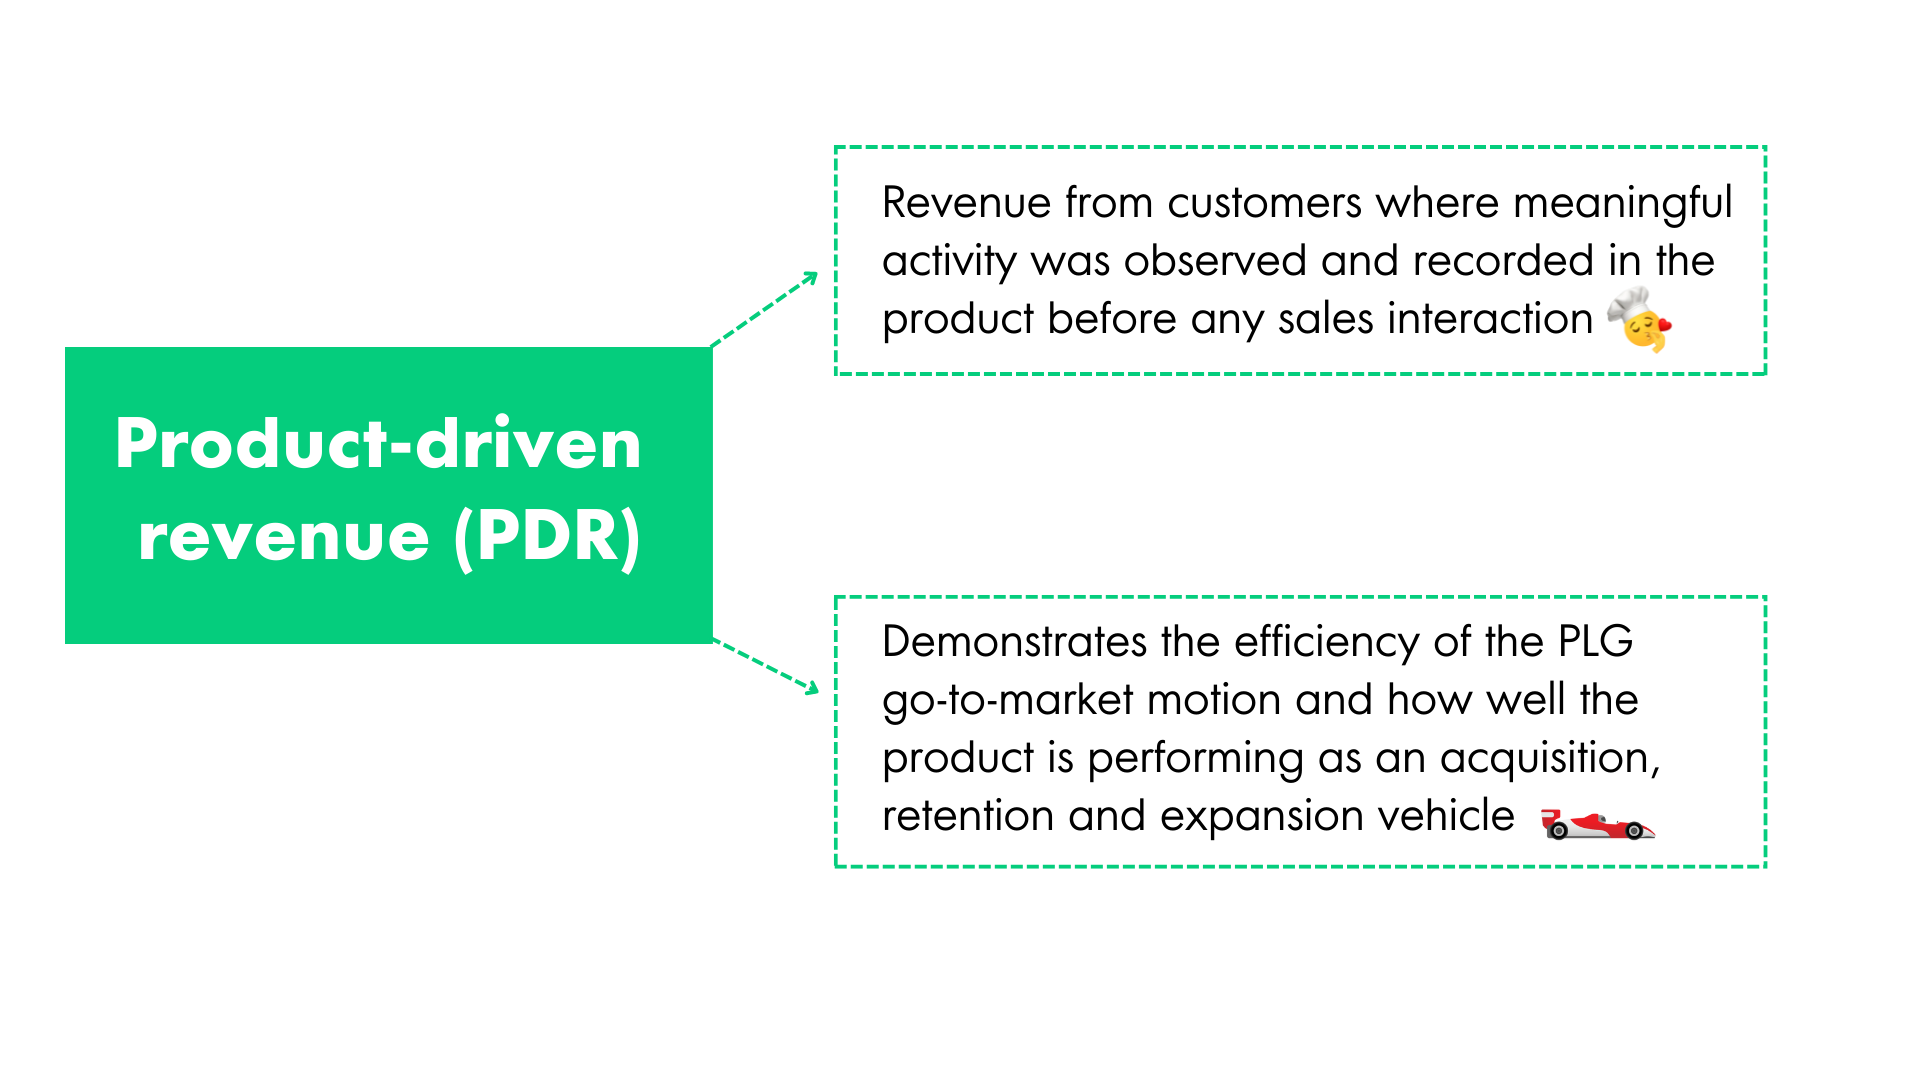 A small flow chart explaining how product-driven revenue influences revenue from customers or the efficiency of a PLG go-to-market motion.